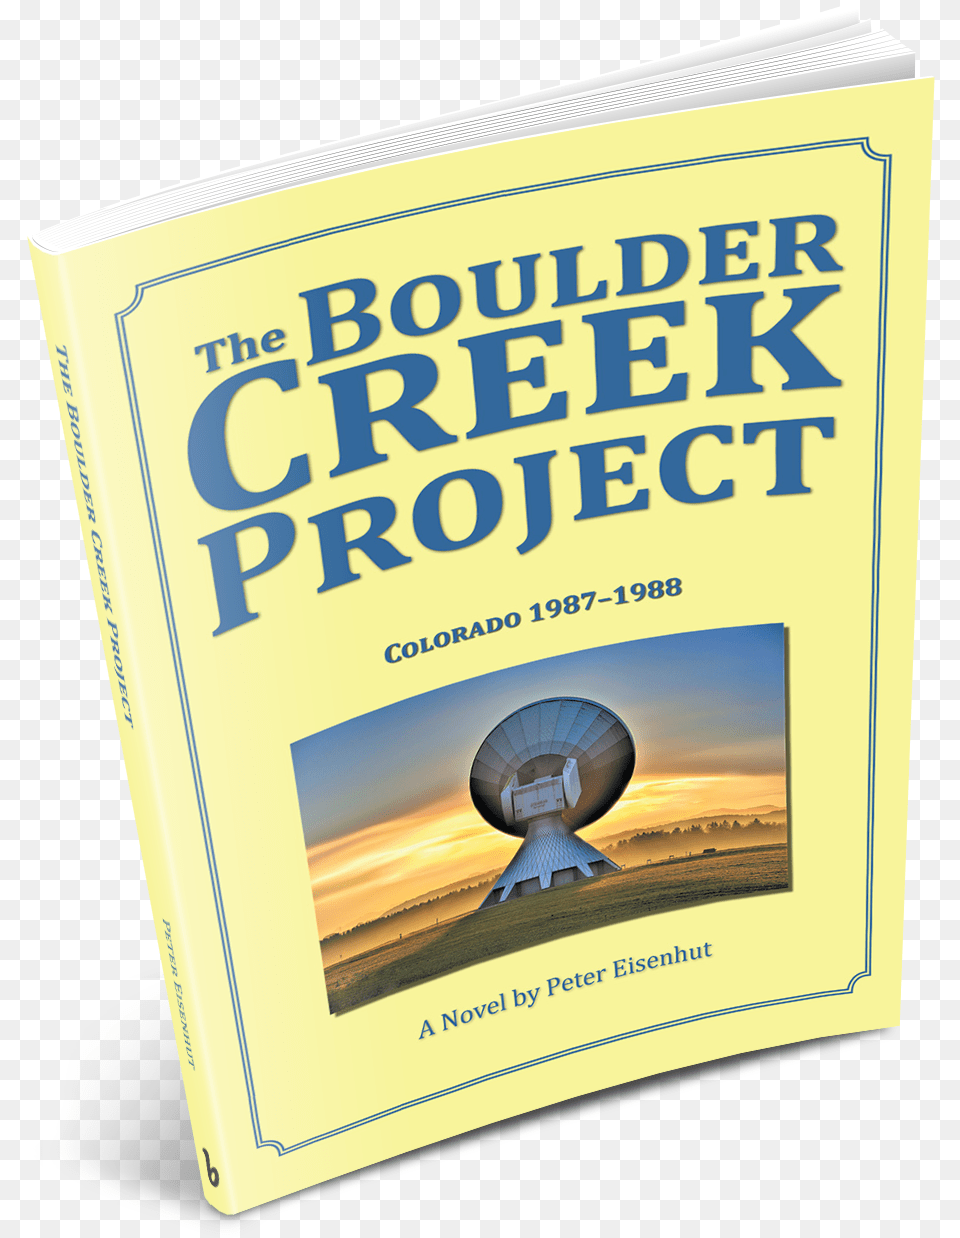 The Boulder Creek Project Takes Place In 1988 Twenty Global Management And Geo Spatial Information System, Book, Publication, Electrical Device Png Image